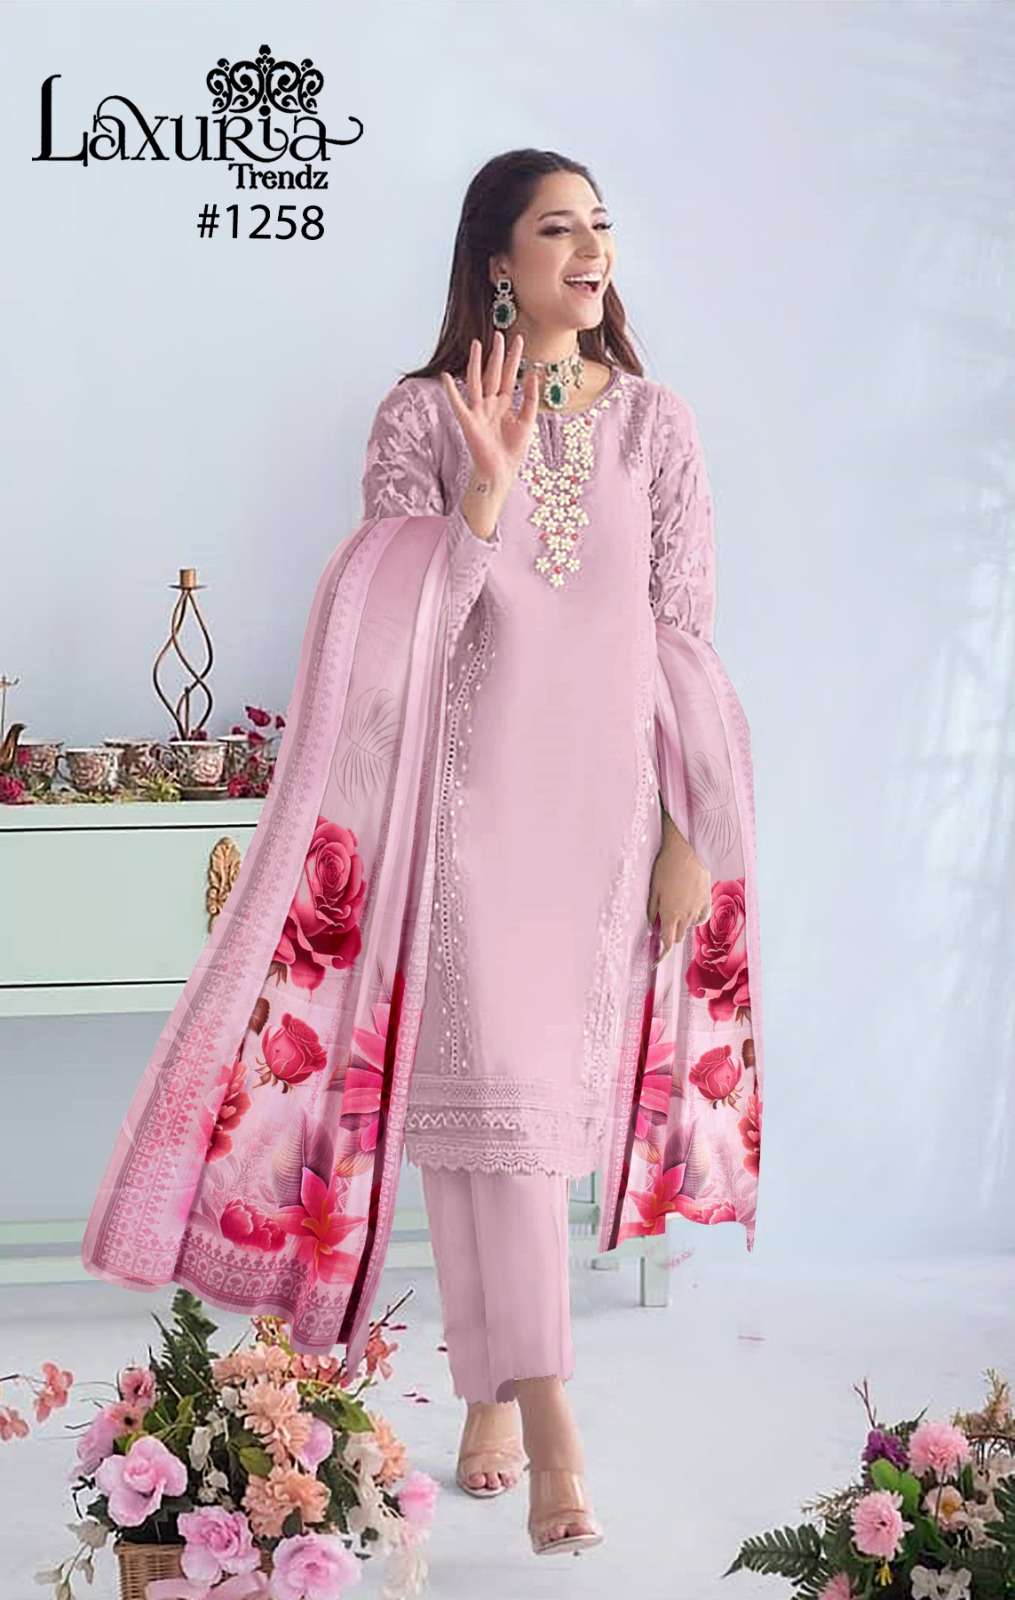 laxuria trendz design number 1258 handwork heavy embroidery pakistani readymade suit collection heavy readymade paksitani dresses 